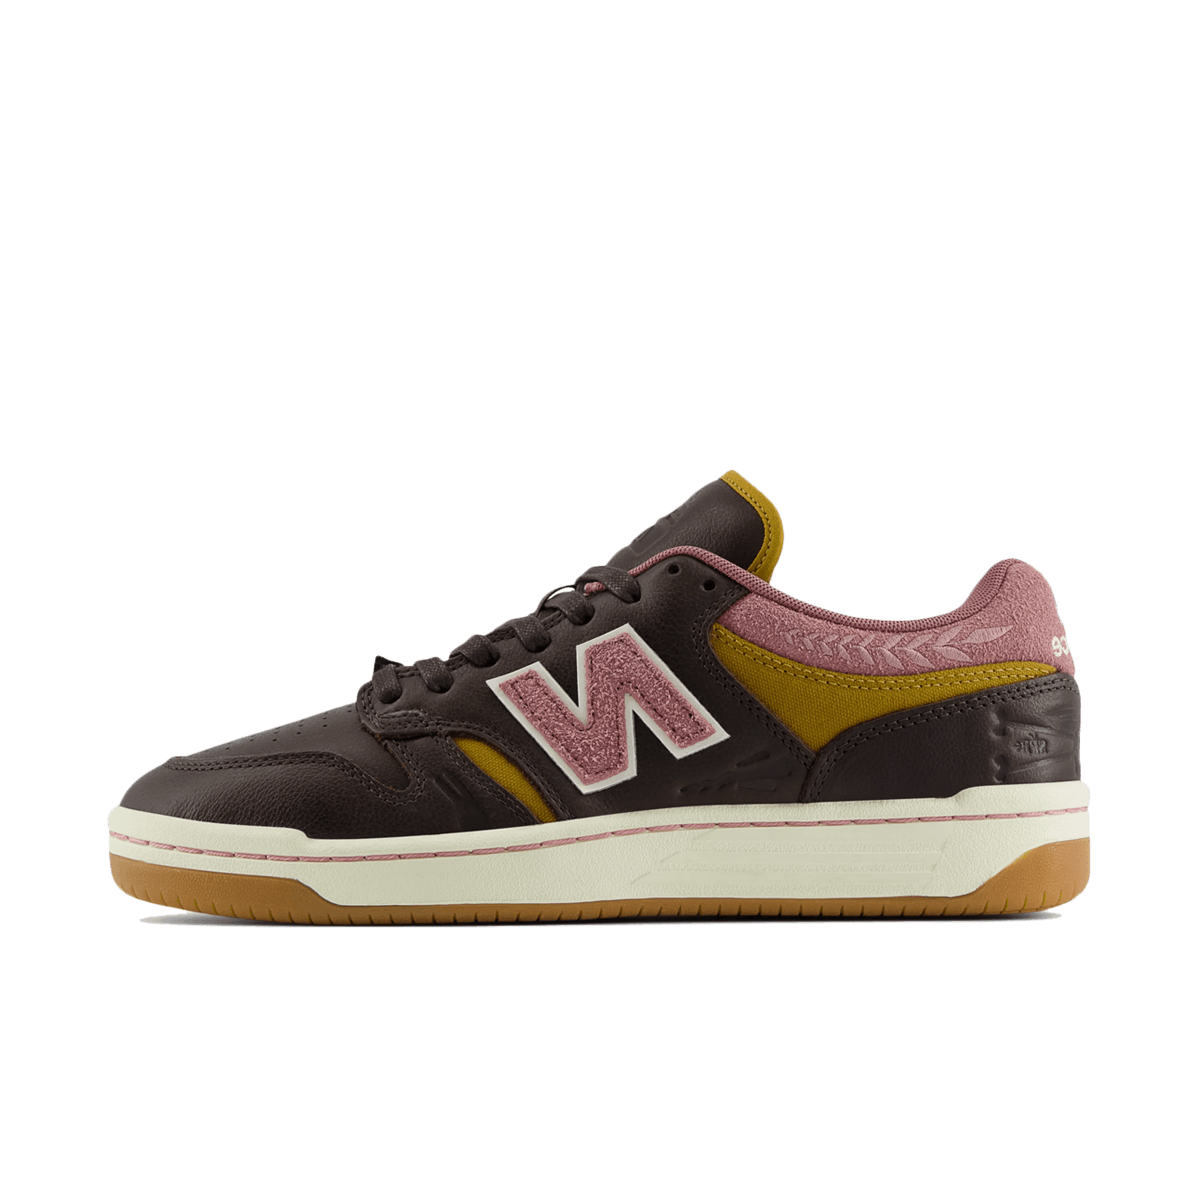 Jeremy Fish x New Balance Numeric 480 'Silly Pink Bunnies' NM480FXT